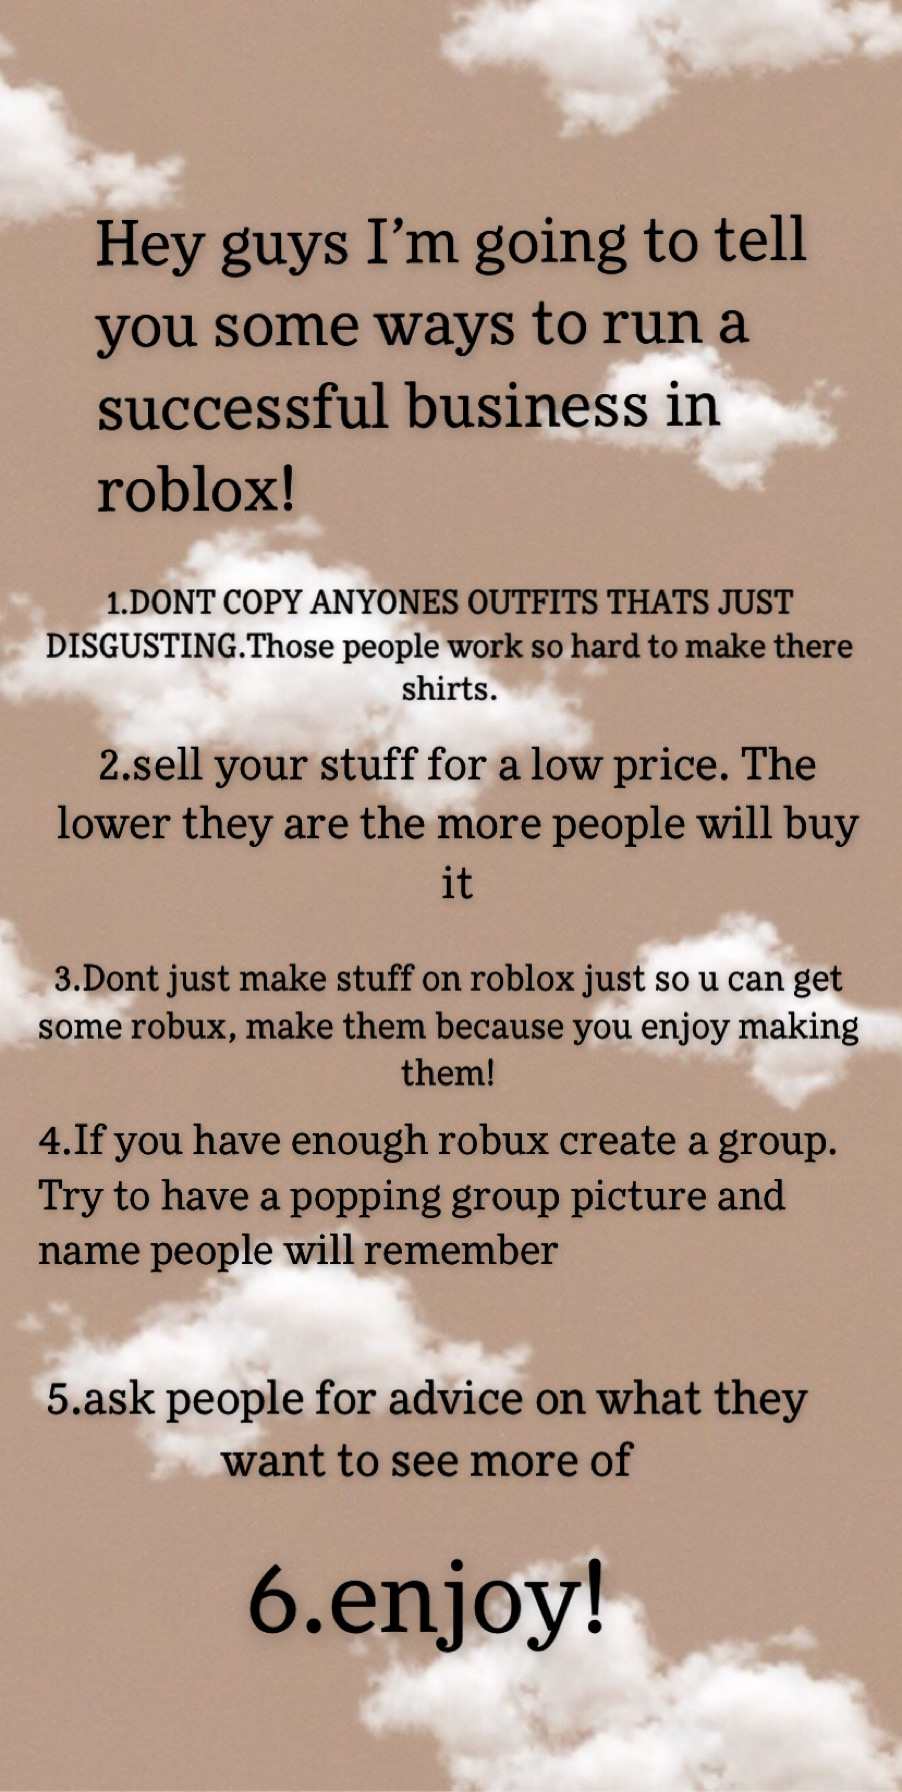 Roblox Giveaway Image By Roblox - make robux group